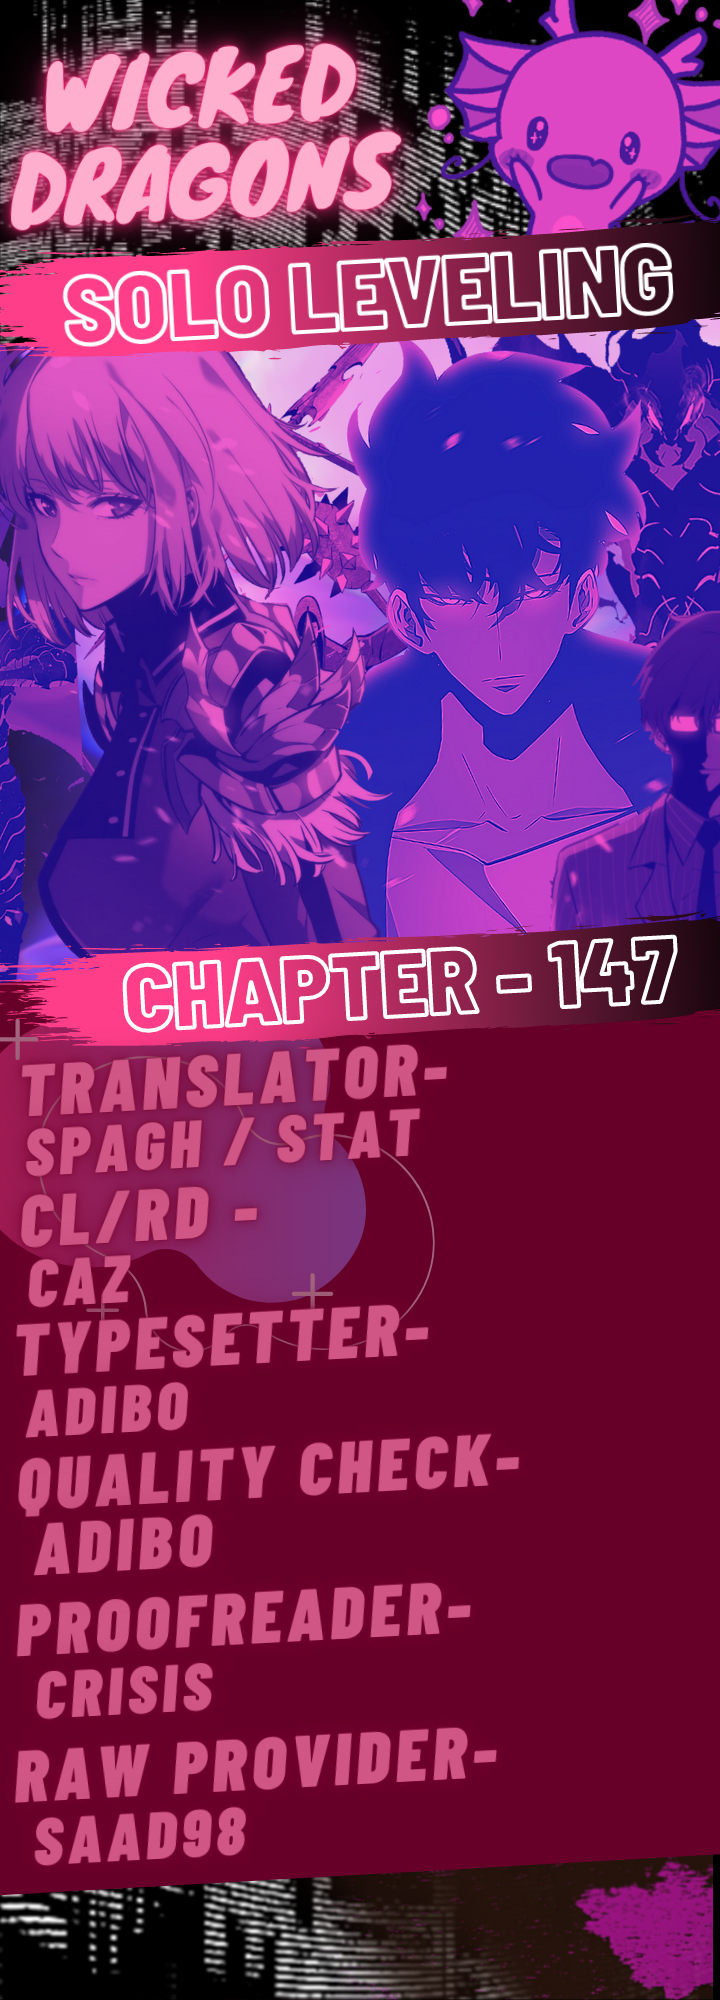 Solo Leveling - Chapter 1995 - Image 1